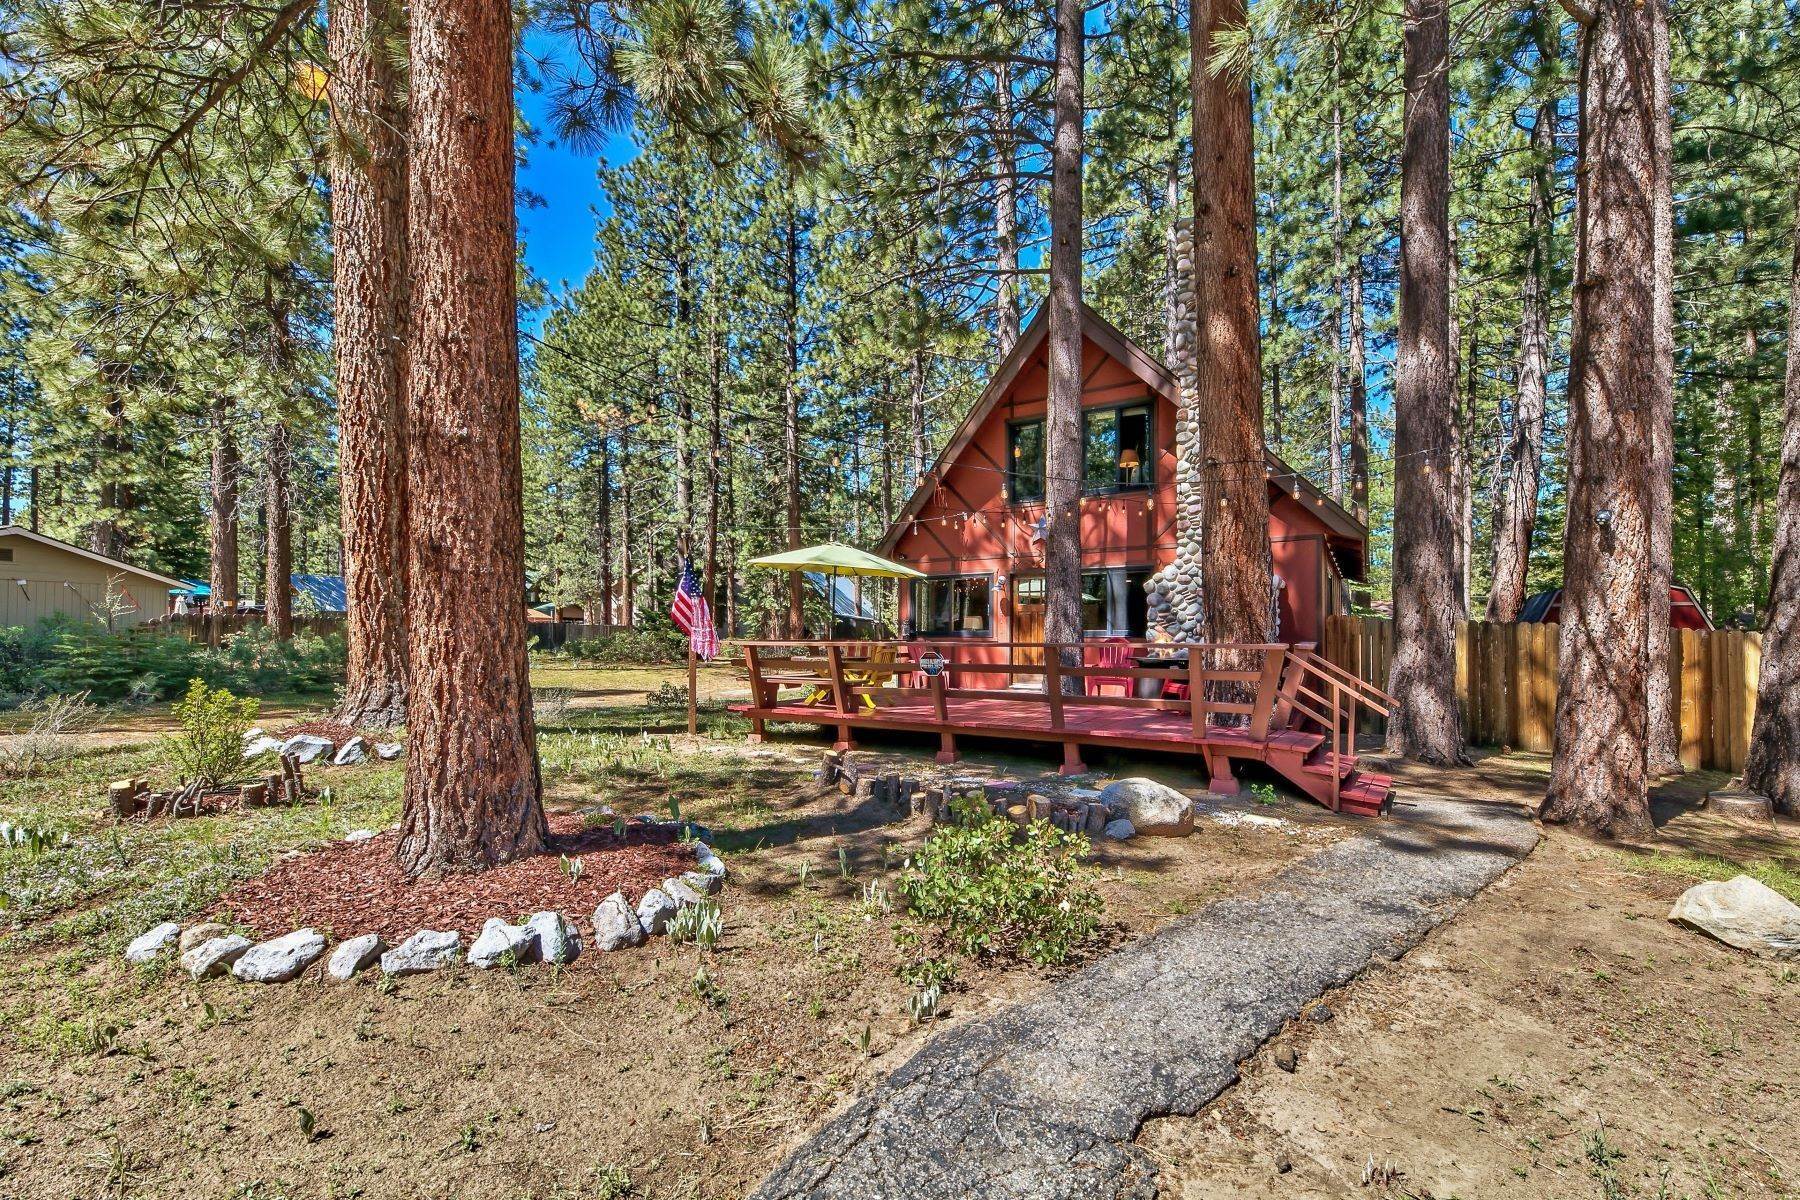 Property for Active at Cabin in the Woods 2159 Harvard Ave South Lake Tahoe, California 96150 United States